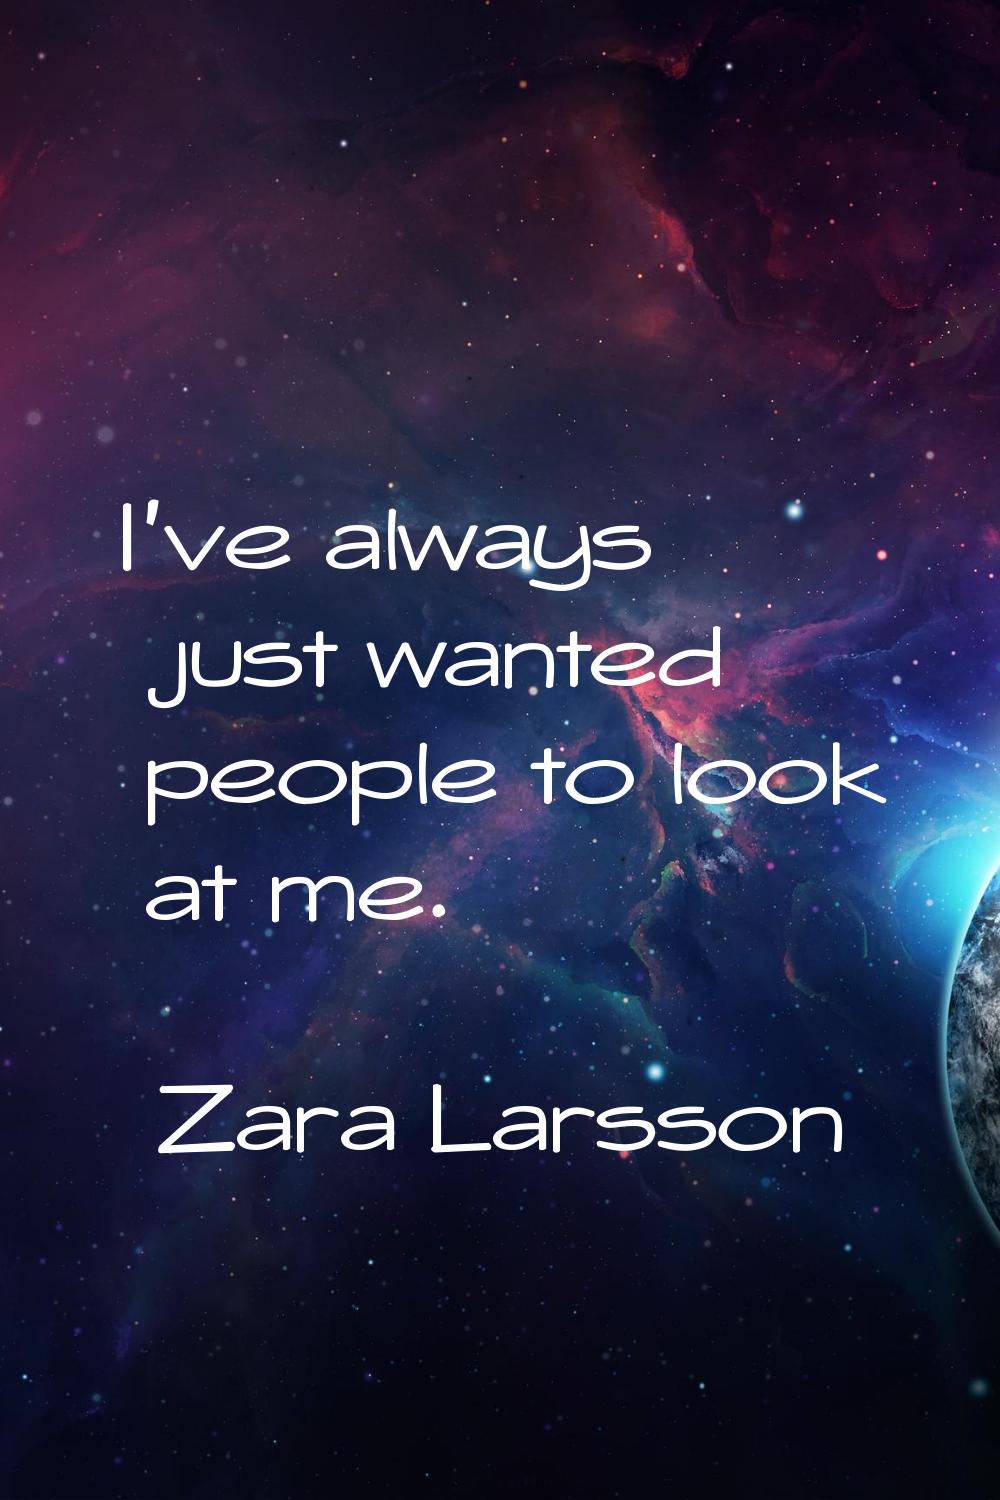 I've always just wanted people to look at me.